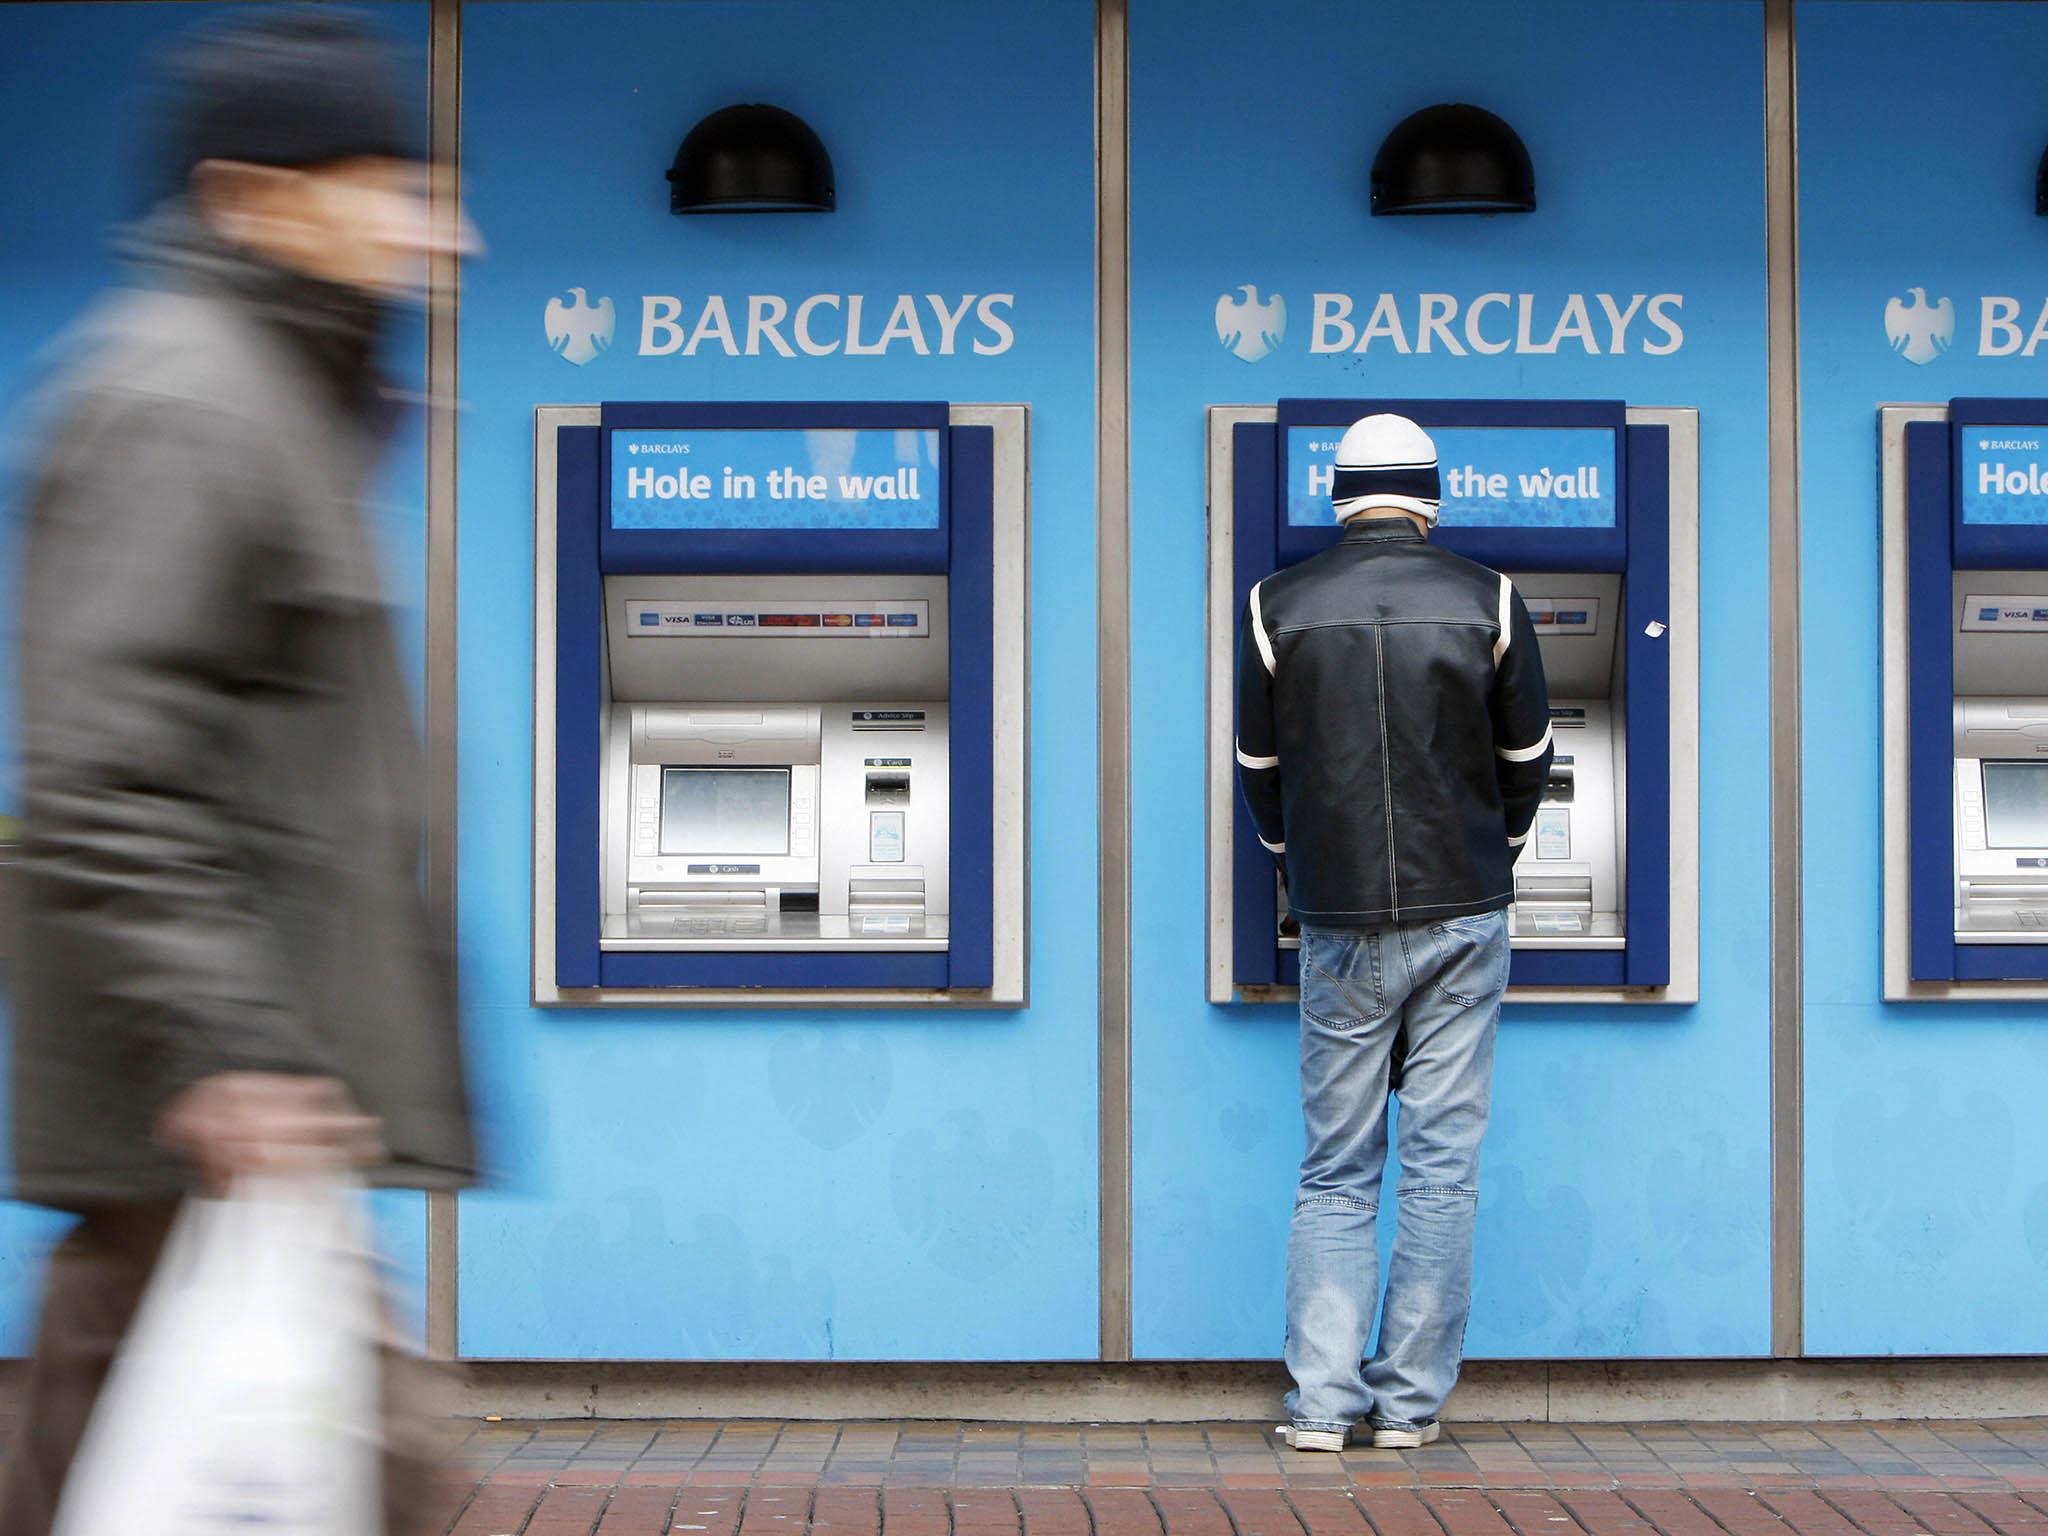 A man uses a cashpoint machine at a Barclays Bank branch in Hounslow, west London